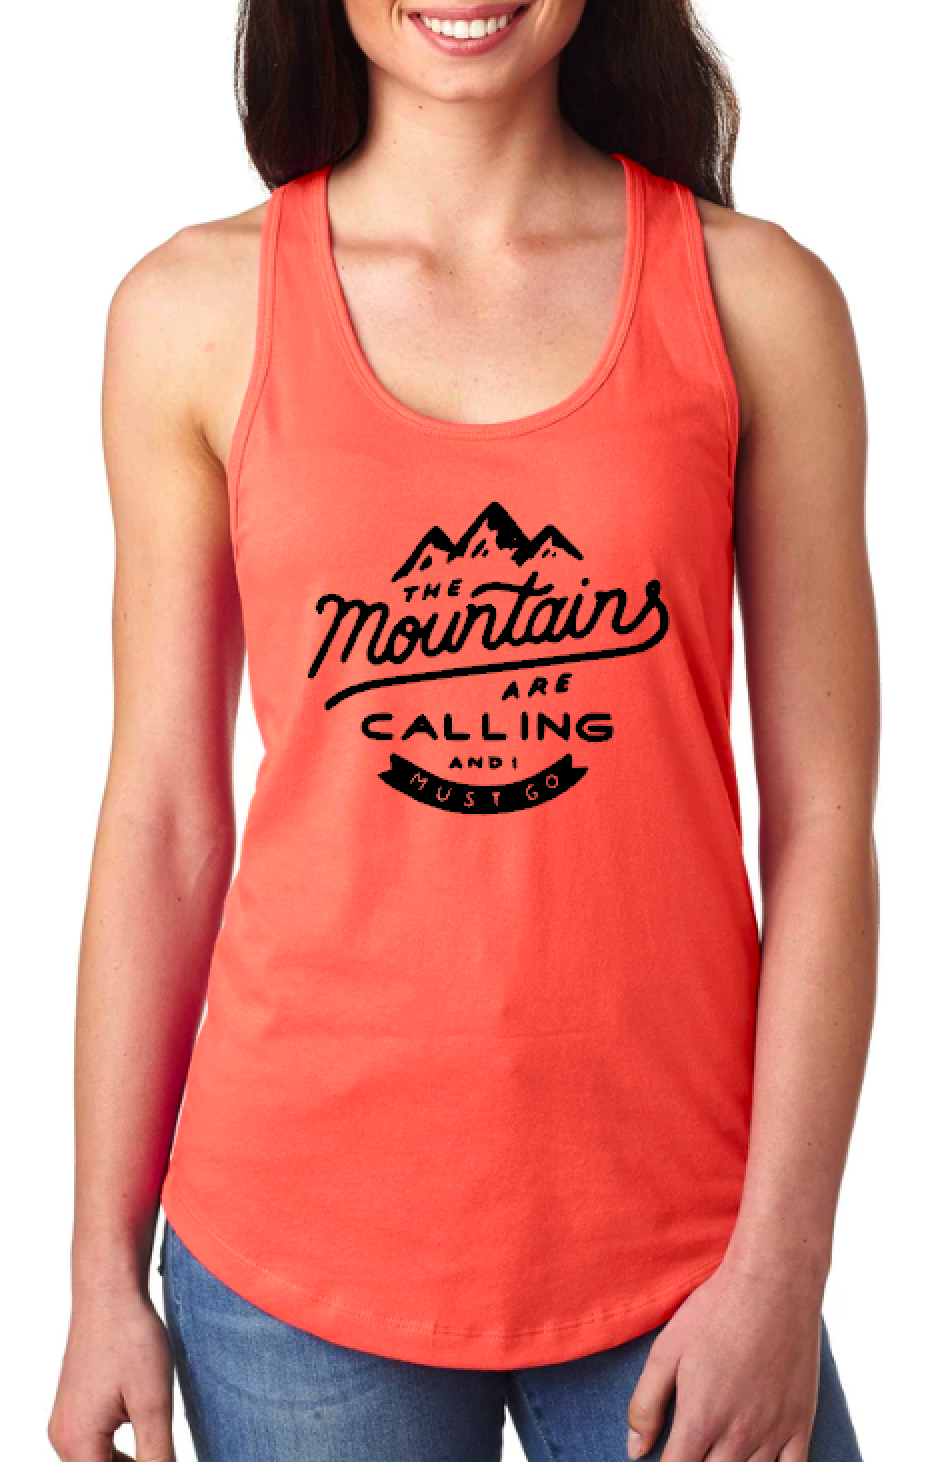 The Mountains Are Calling and I Must Go - Racerback Tank